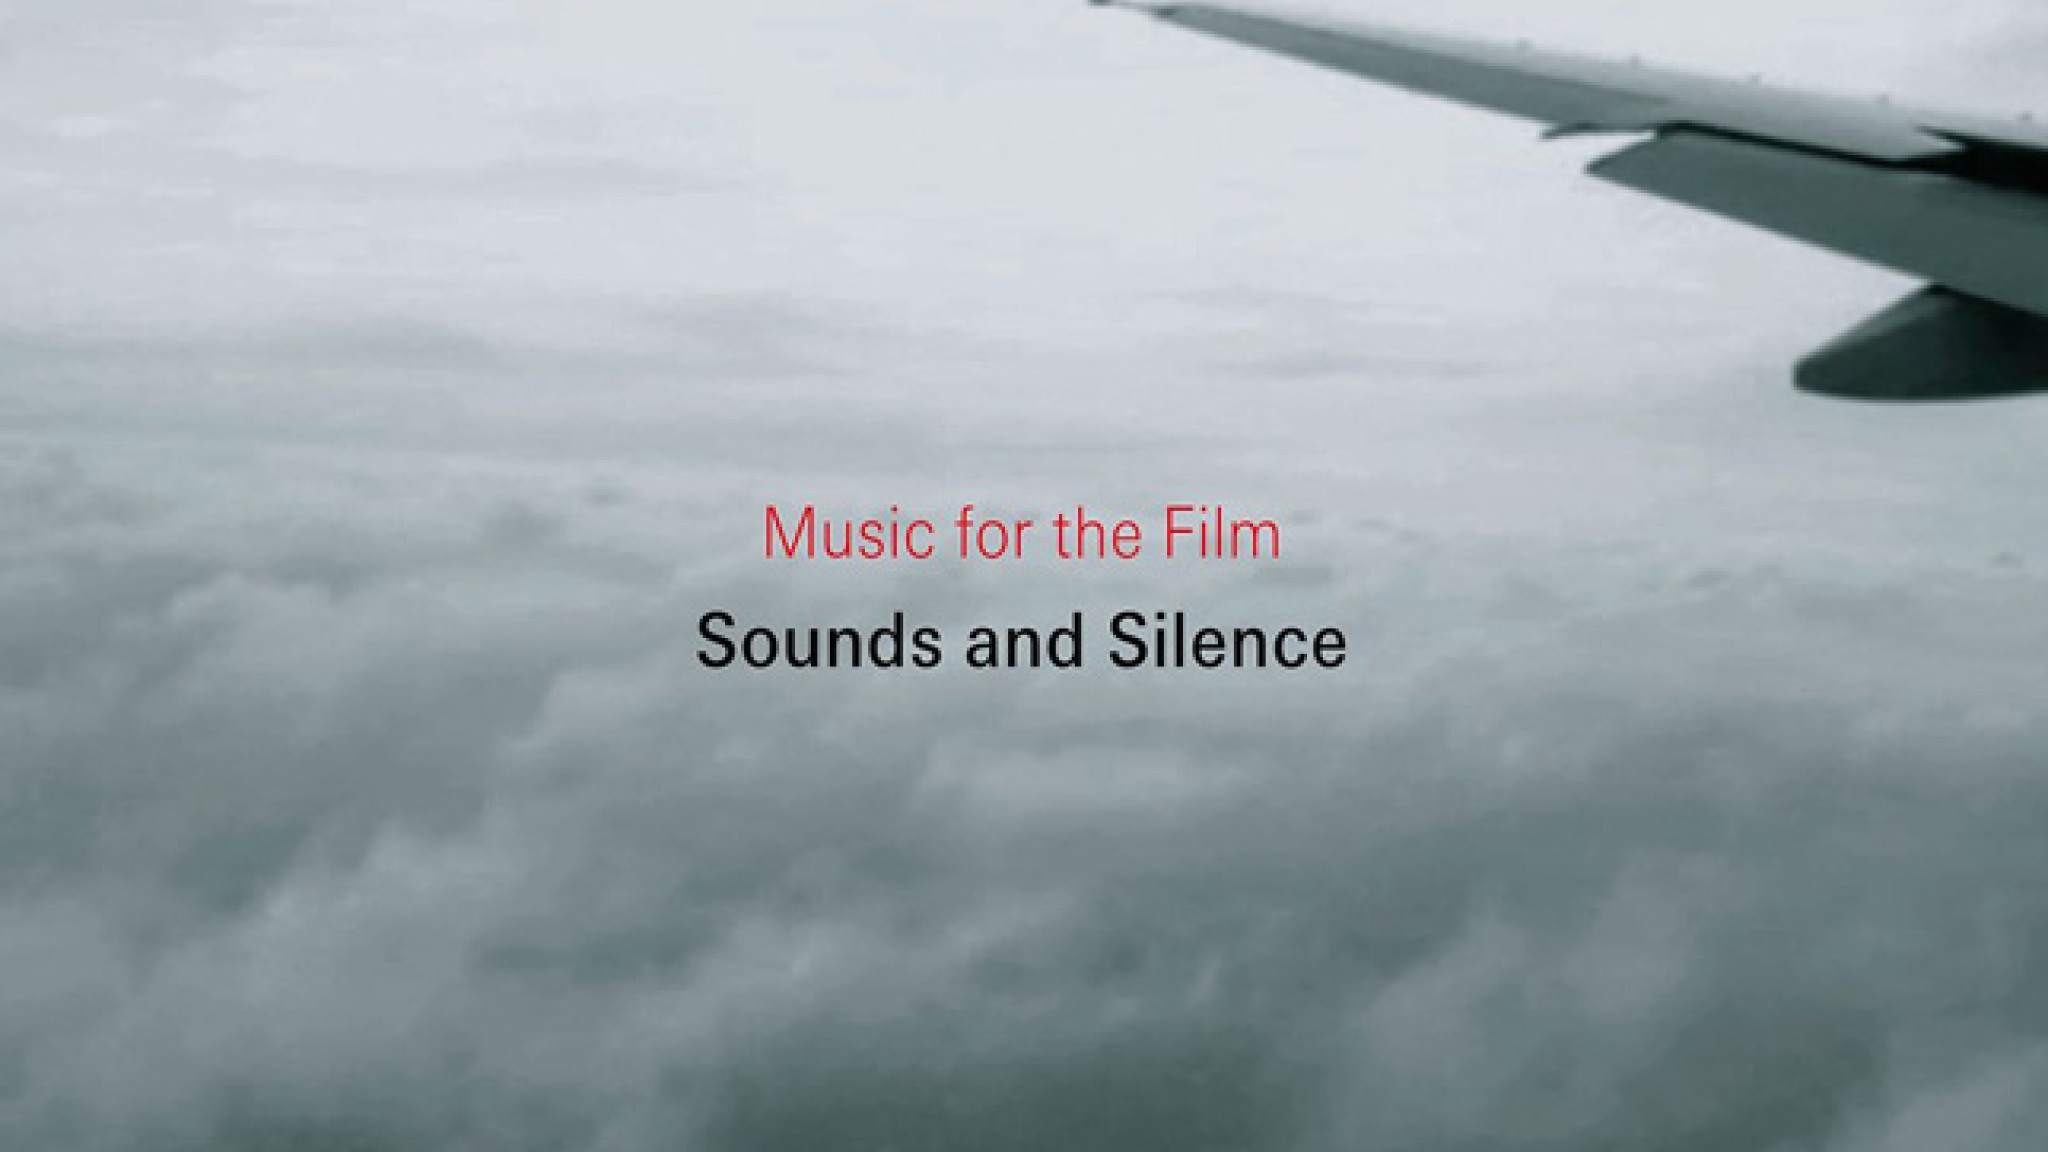 Sounds And Silence - Auf Manfred Eichers (Ton)Spuren